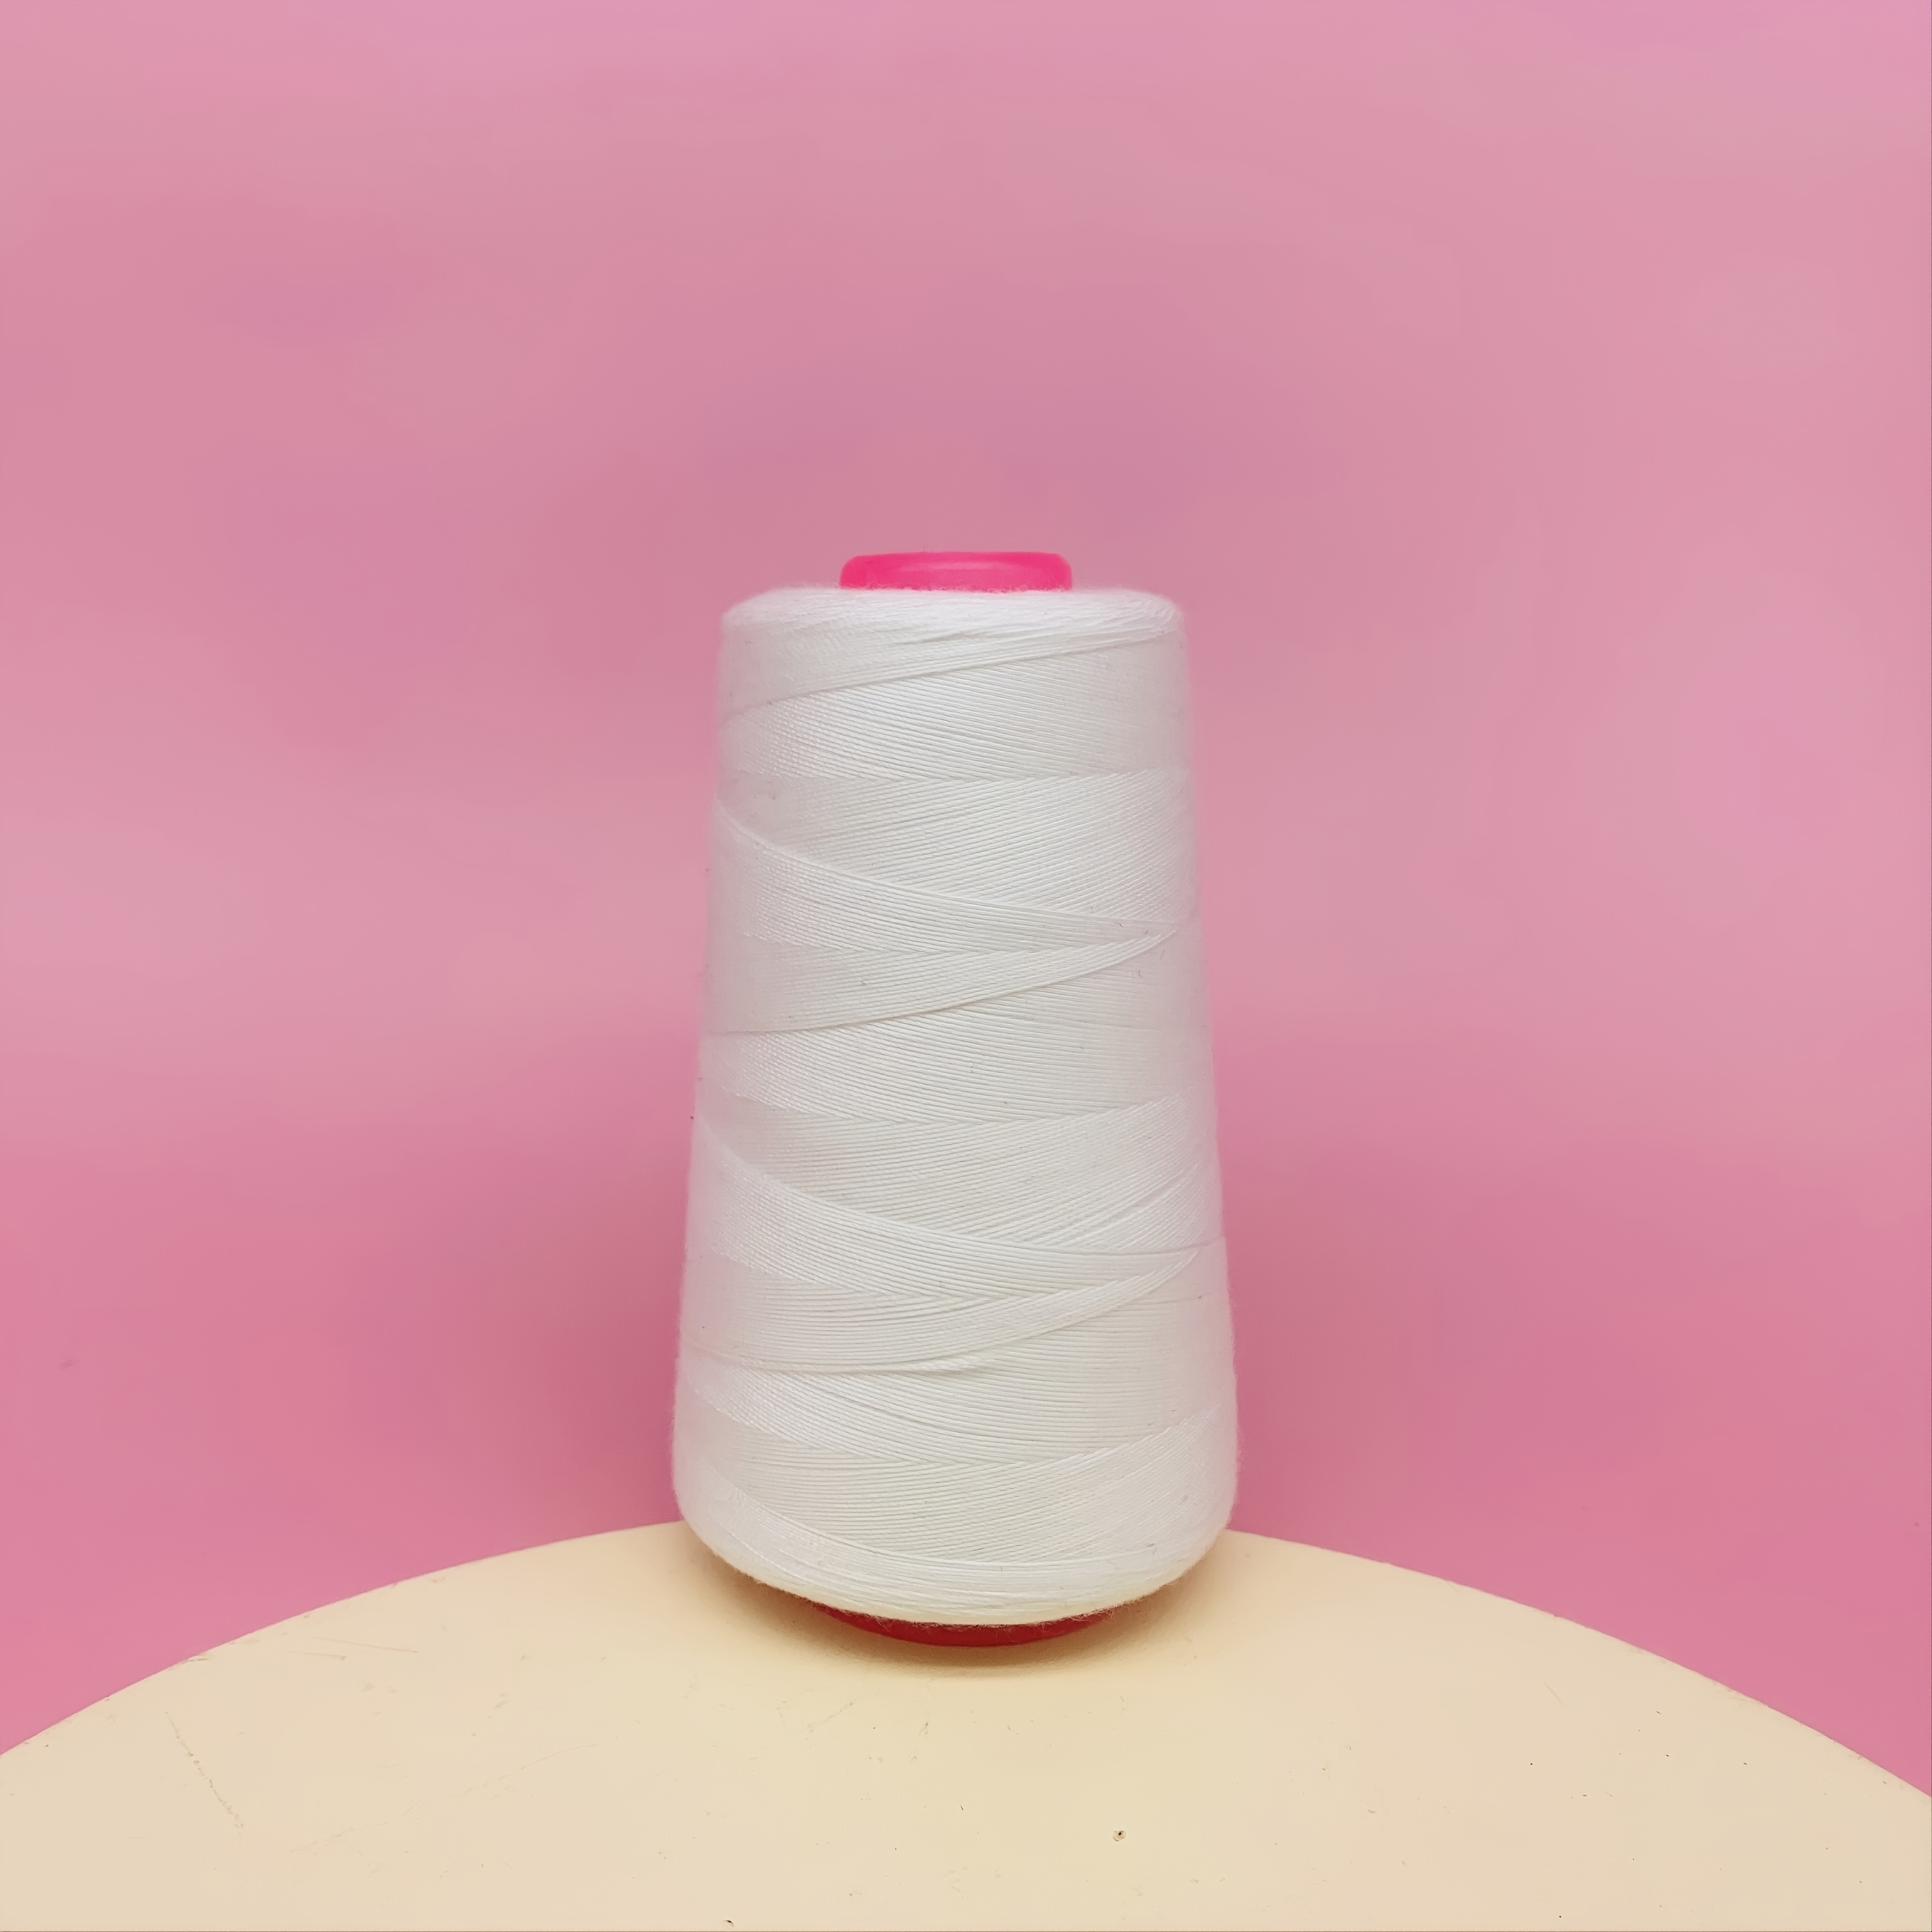  4 Large Cones (3000 Yards Each) of Polyester Threads